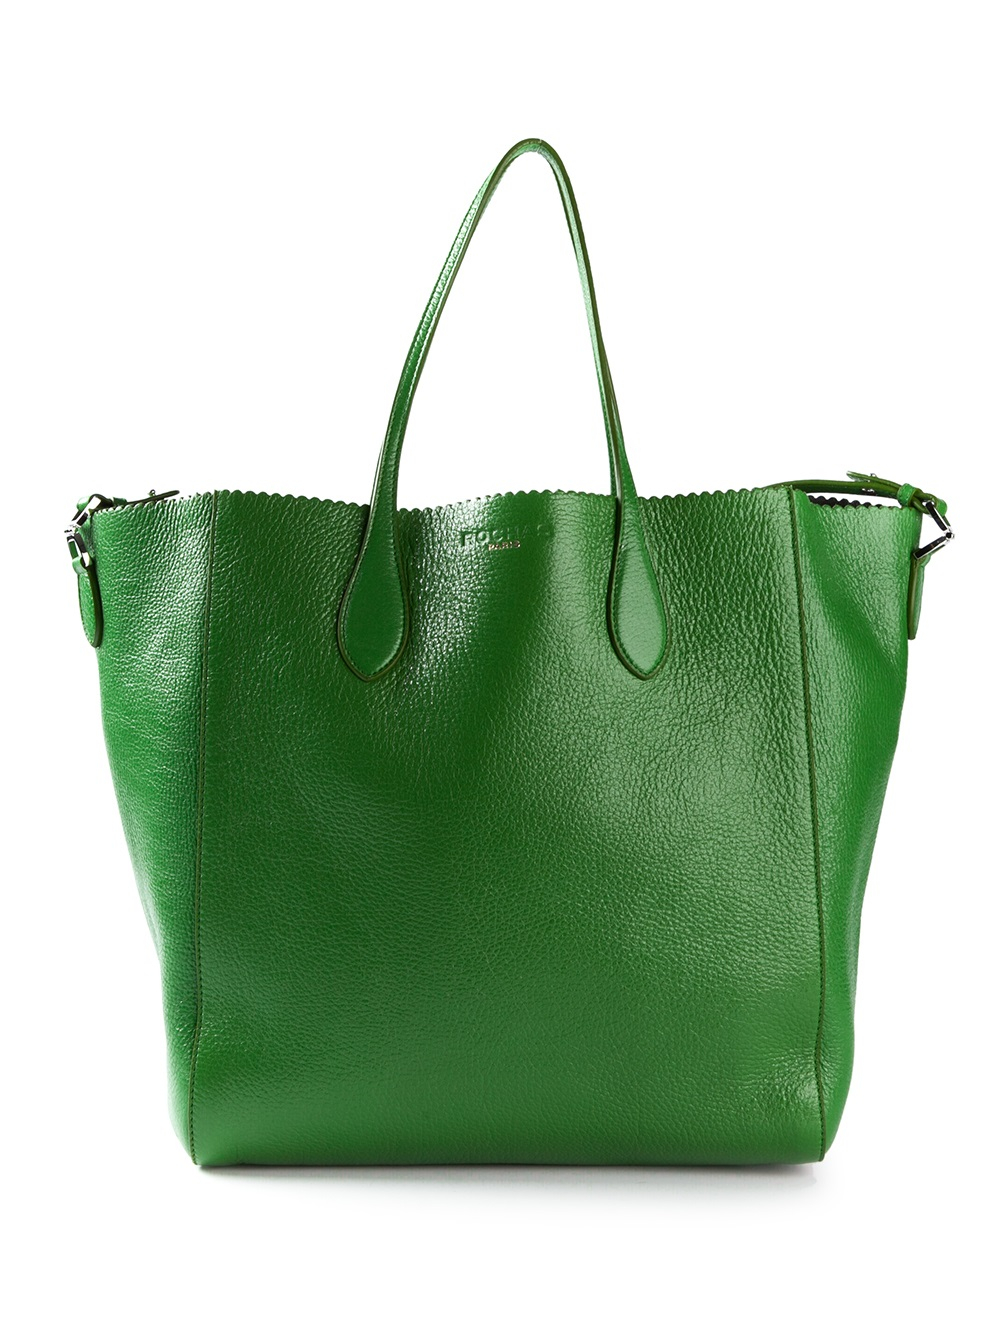 Rochas Classic Tote Bag in Green | Lyst